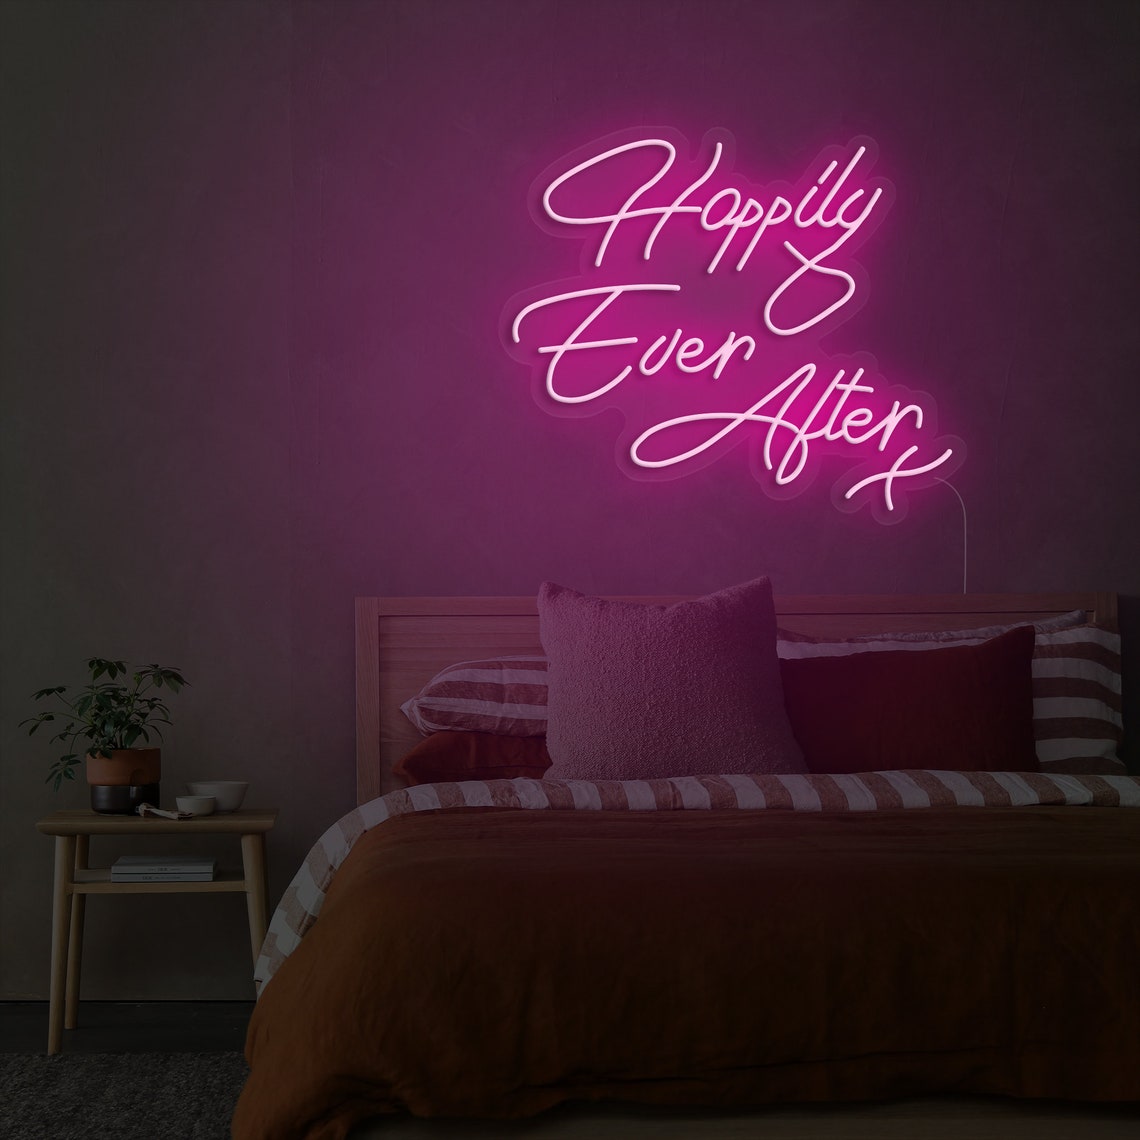 Happily Ever After LED Neon Sign Custom Neon Neon Light | Etsy